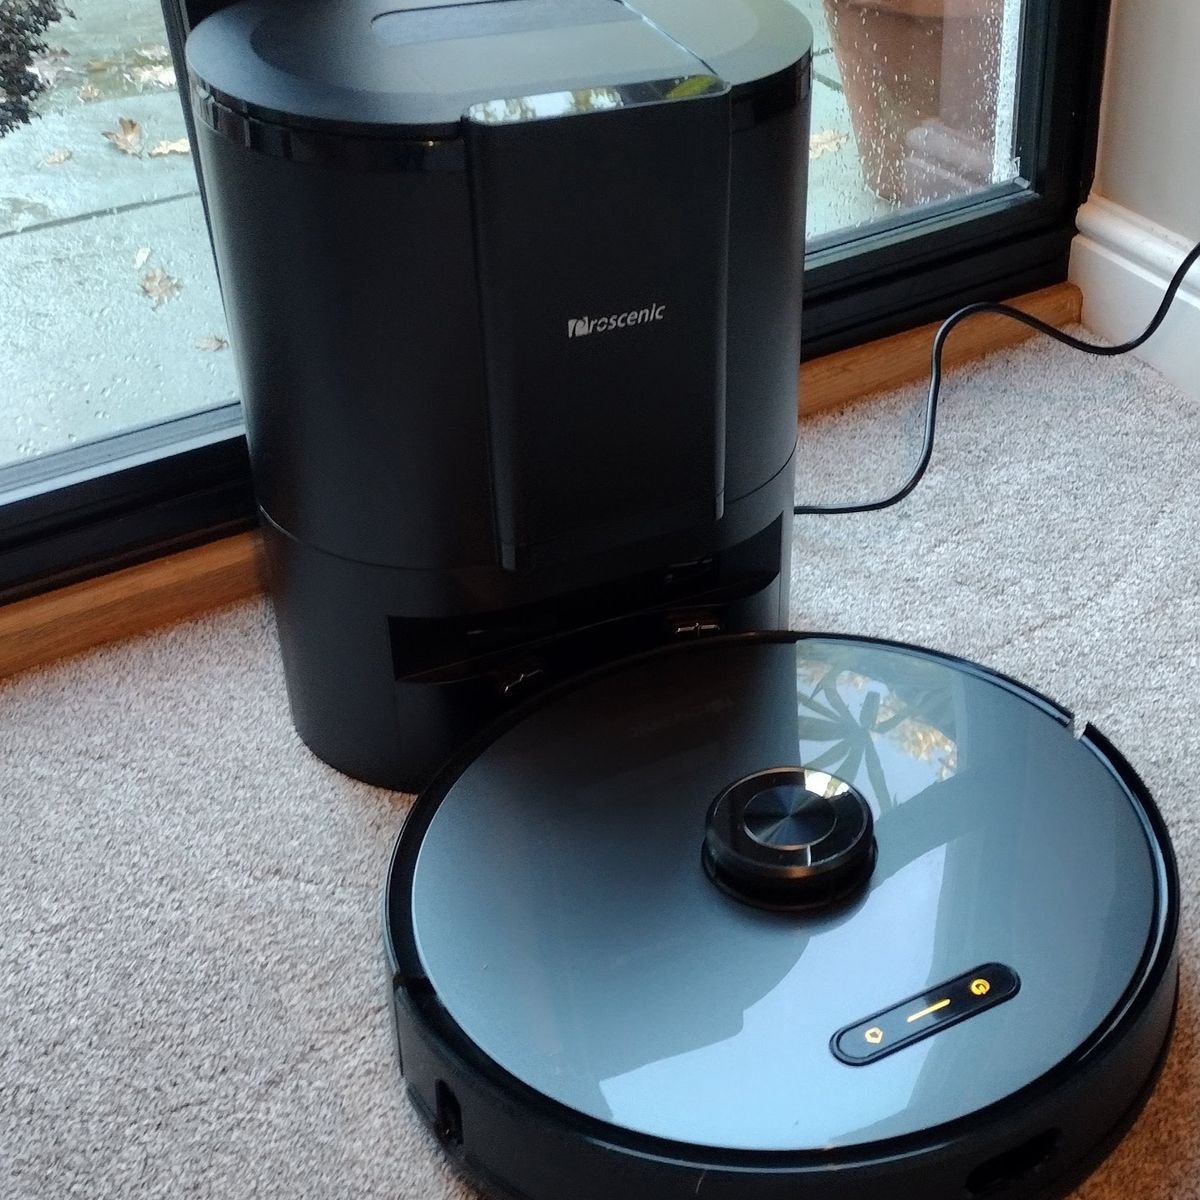 We tried the Proscenic M8 Pro Robot Vacuum - it lets you skip vacuuming AND mopping